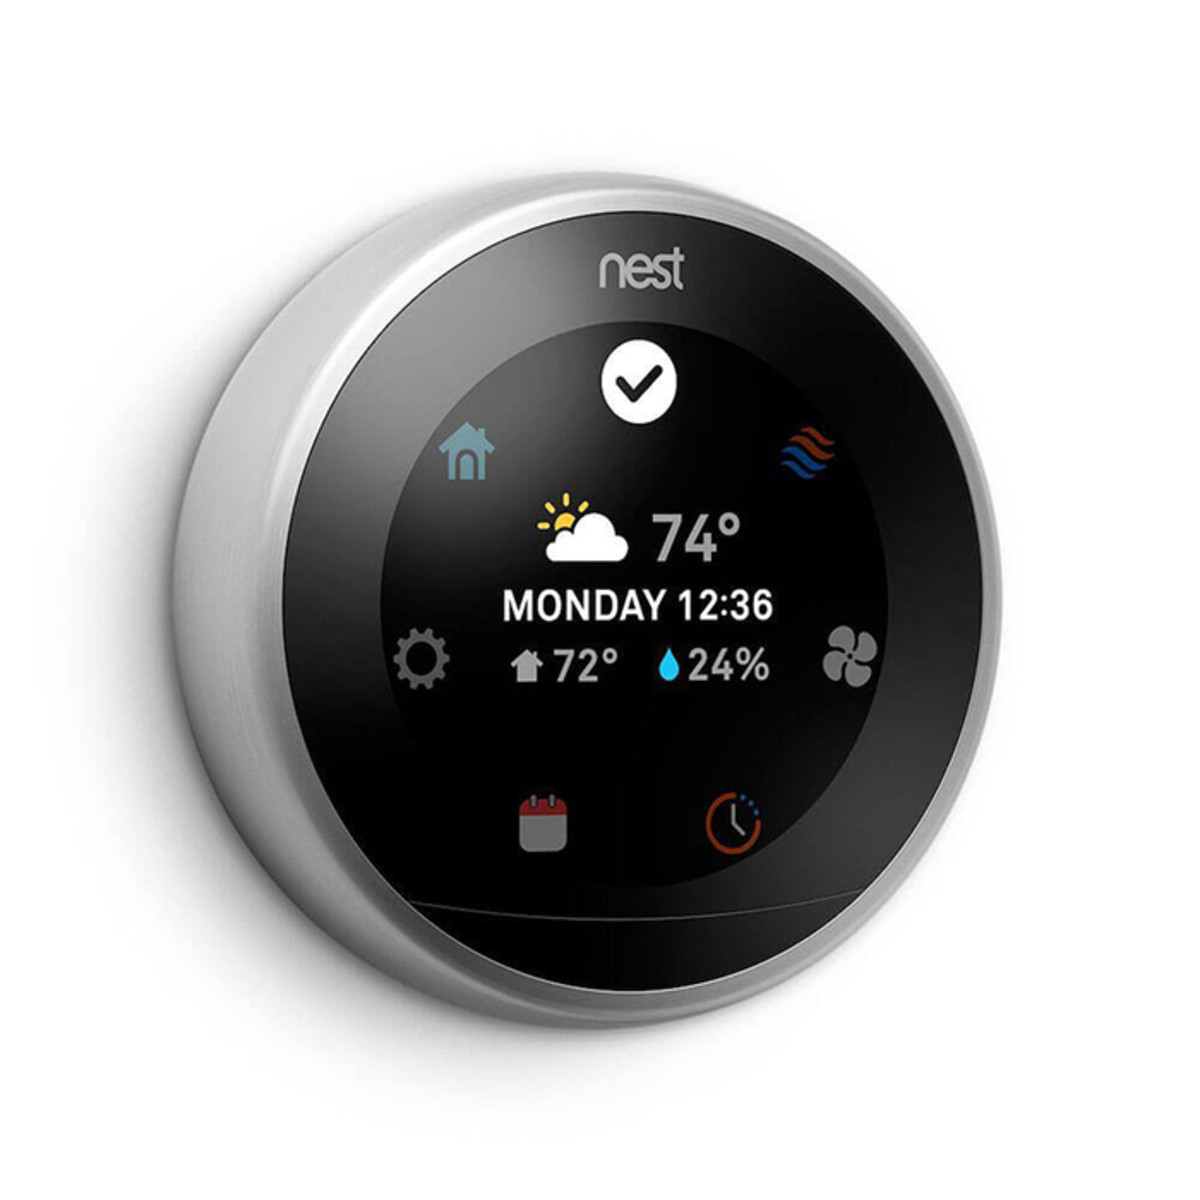 nest-thermostat-fathers-day.jpg